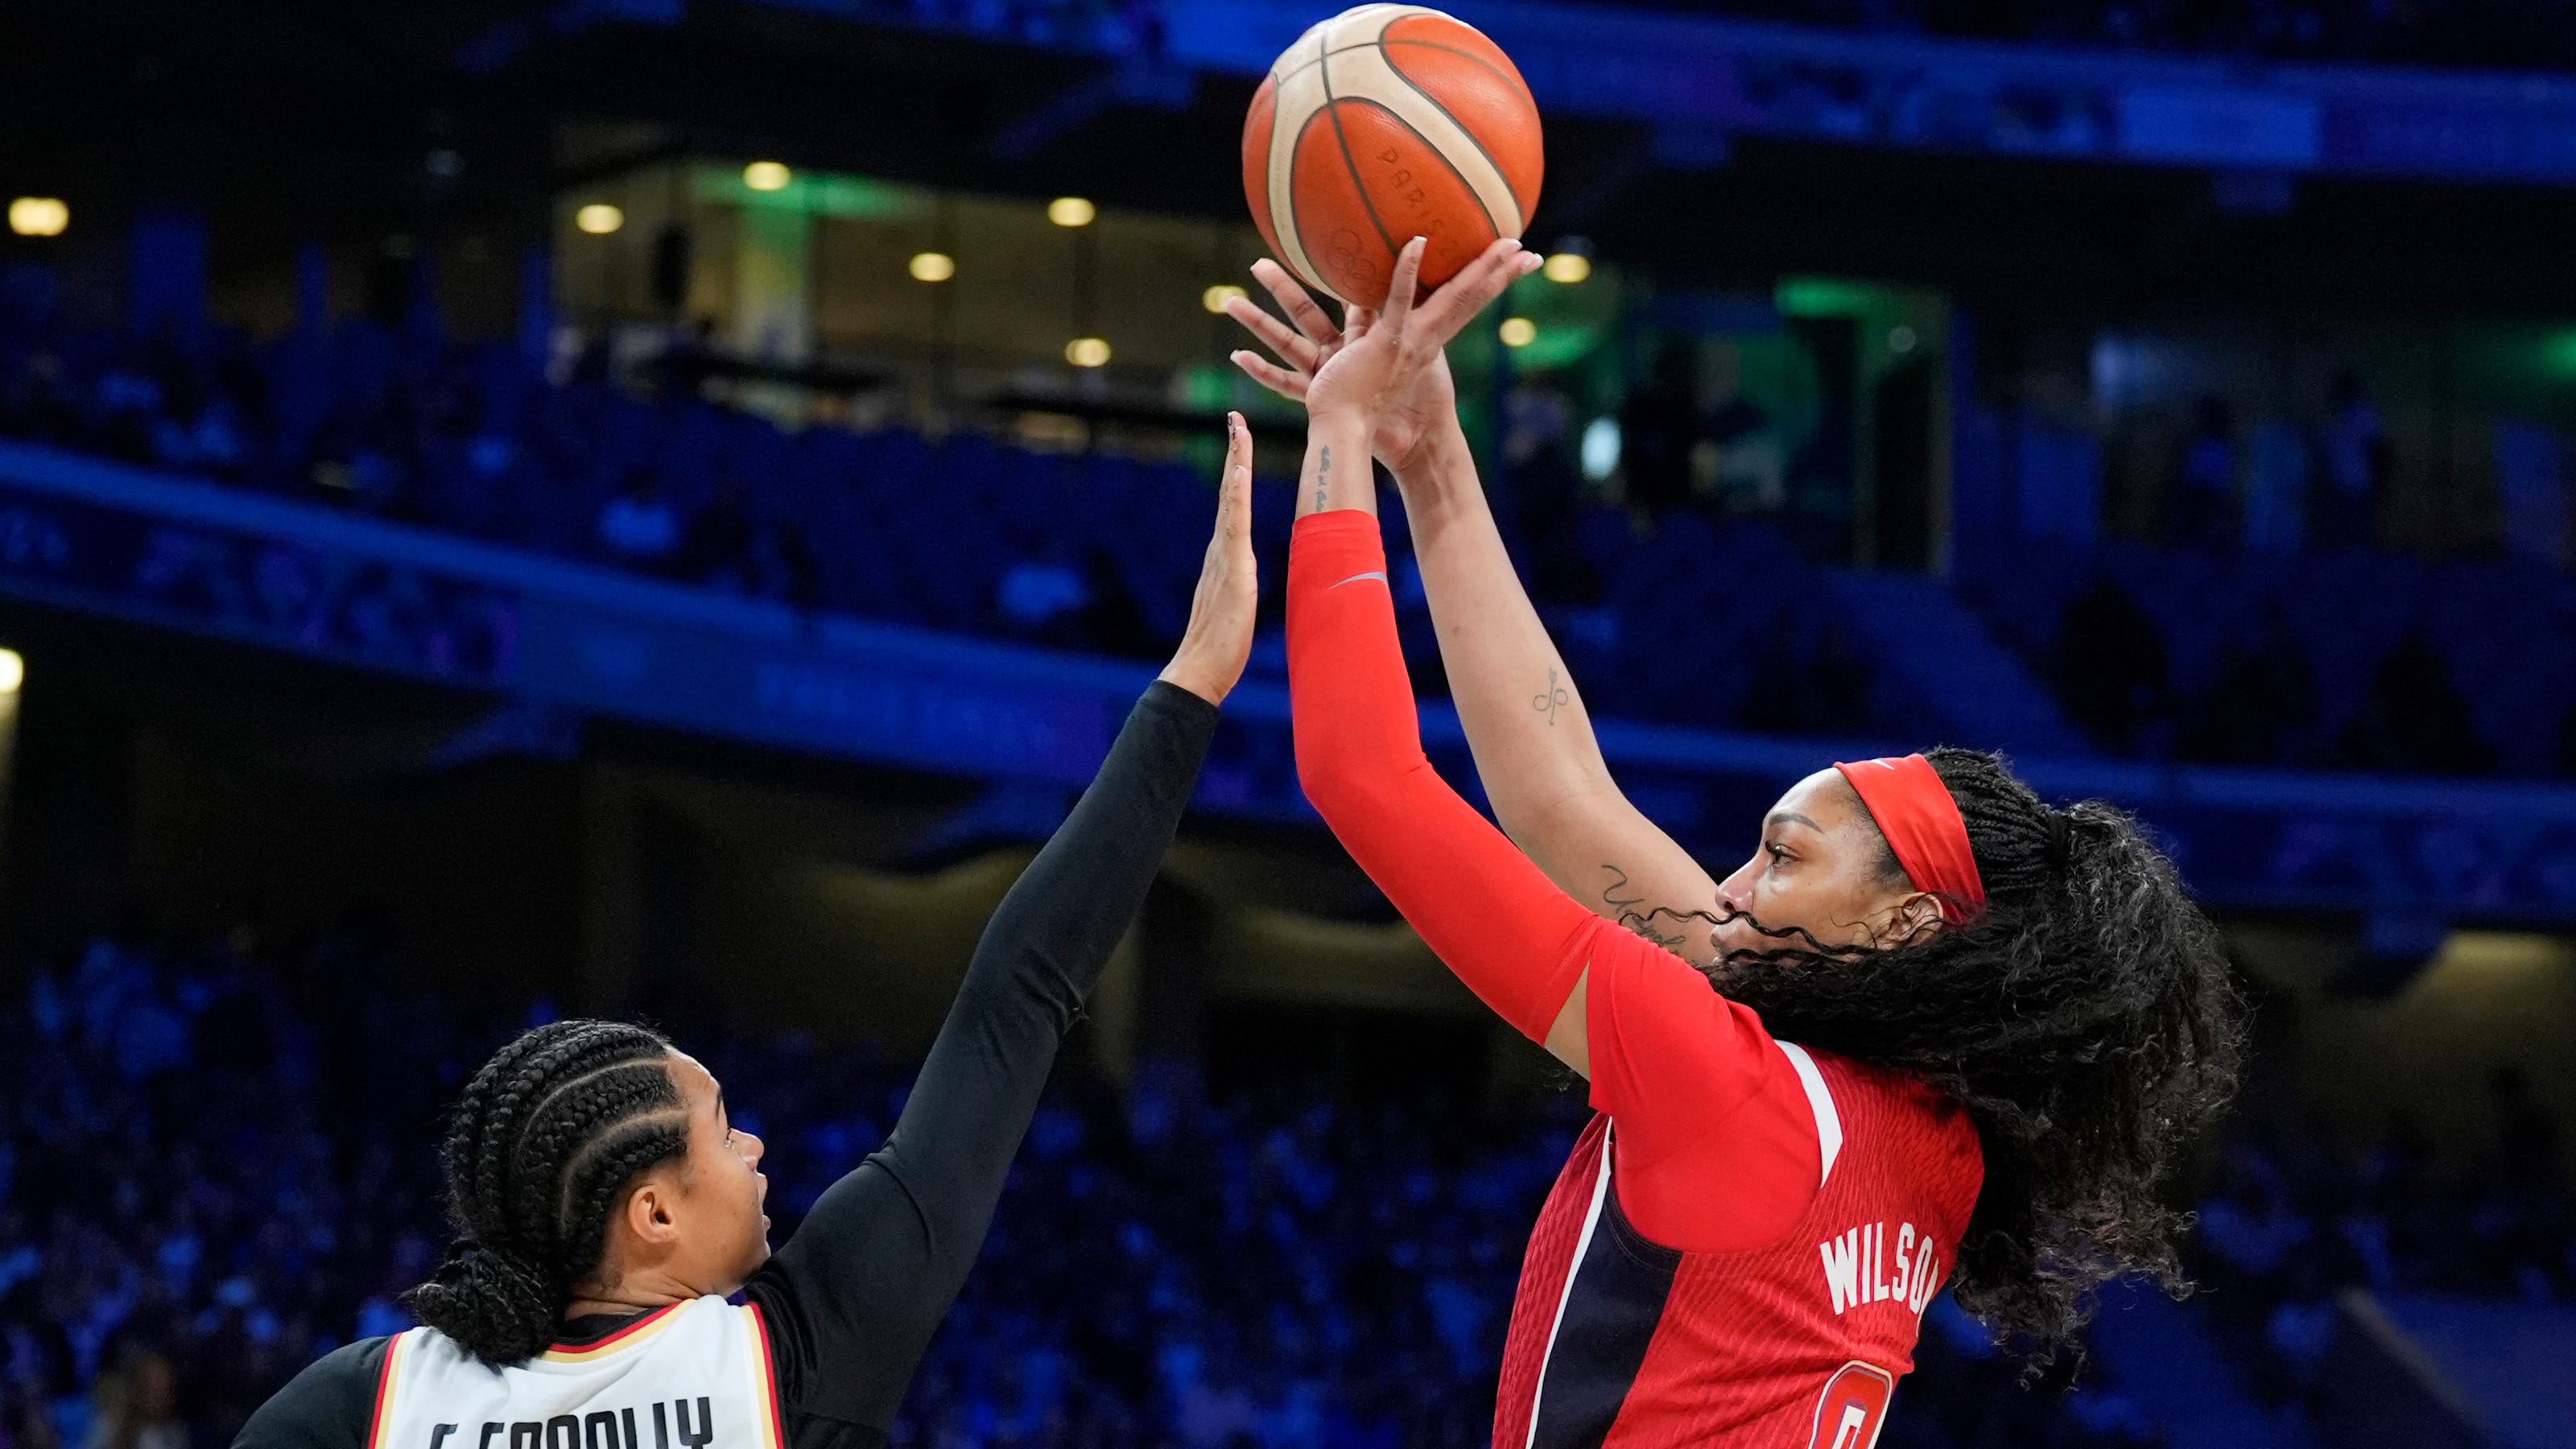 US women's basketball vs Germany shows how WNBA's prioritization rule hurts the game